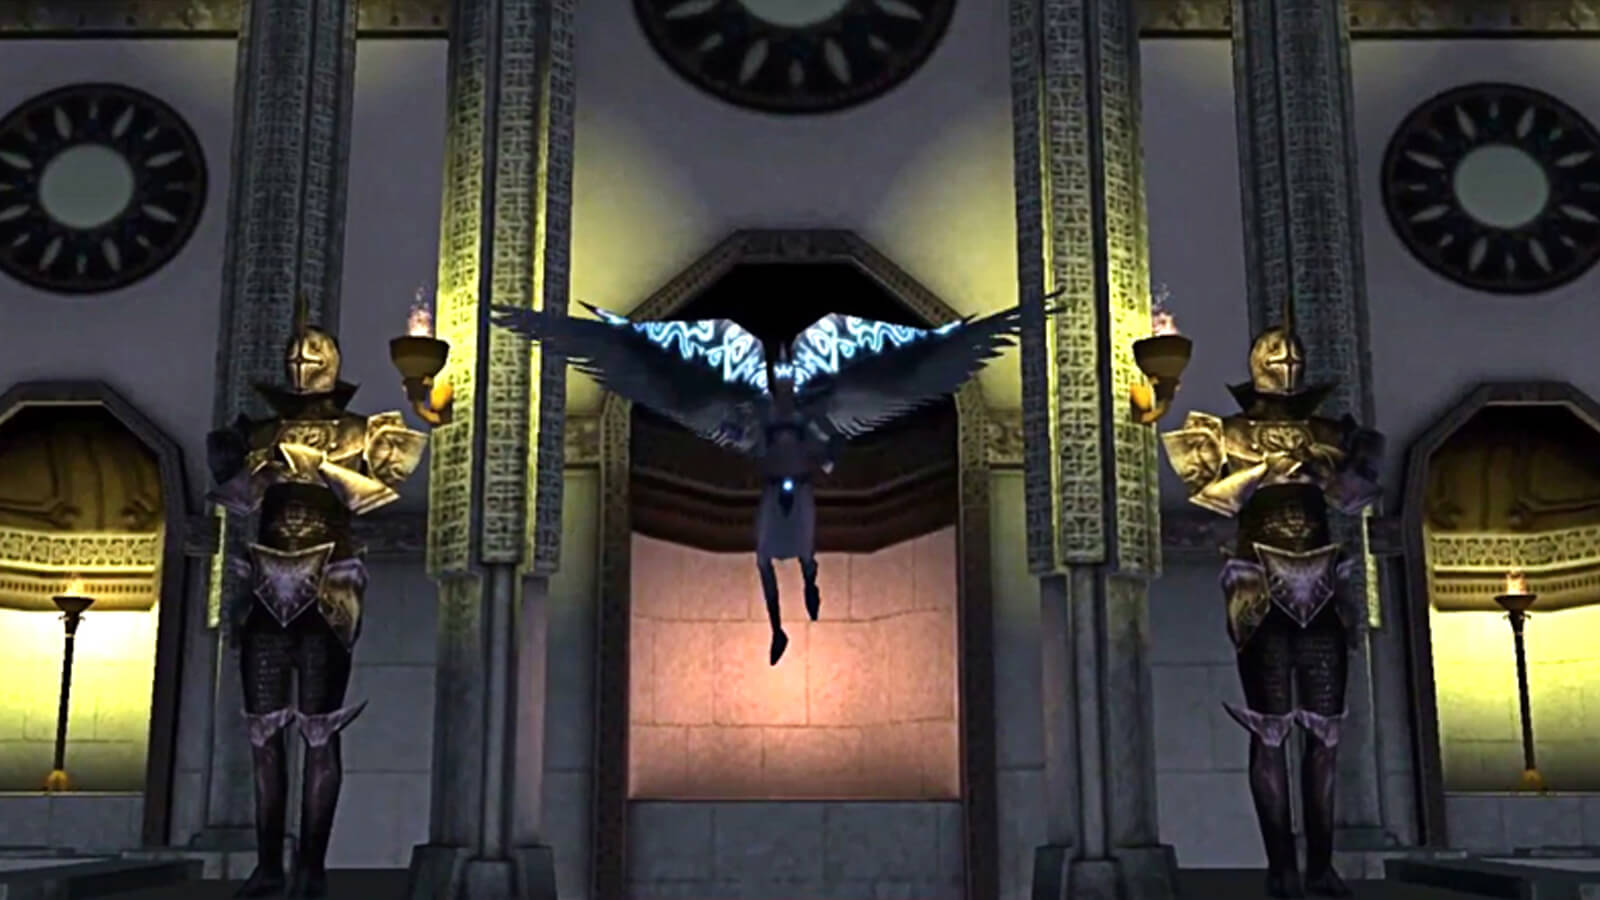 A winged supernatural being floats in front of an ornate stone edifice flanked by knights. 